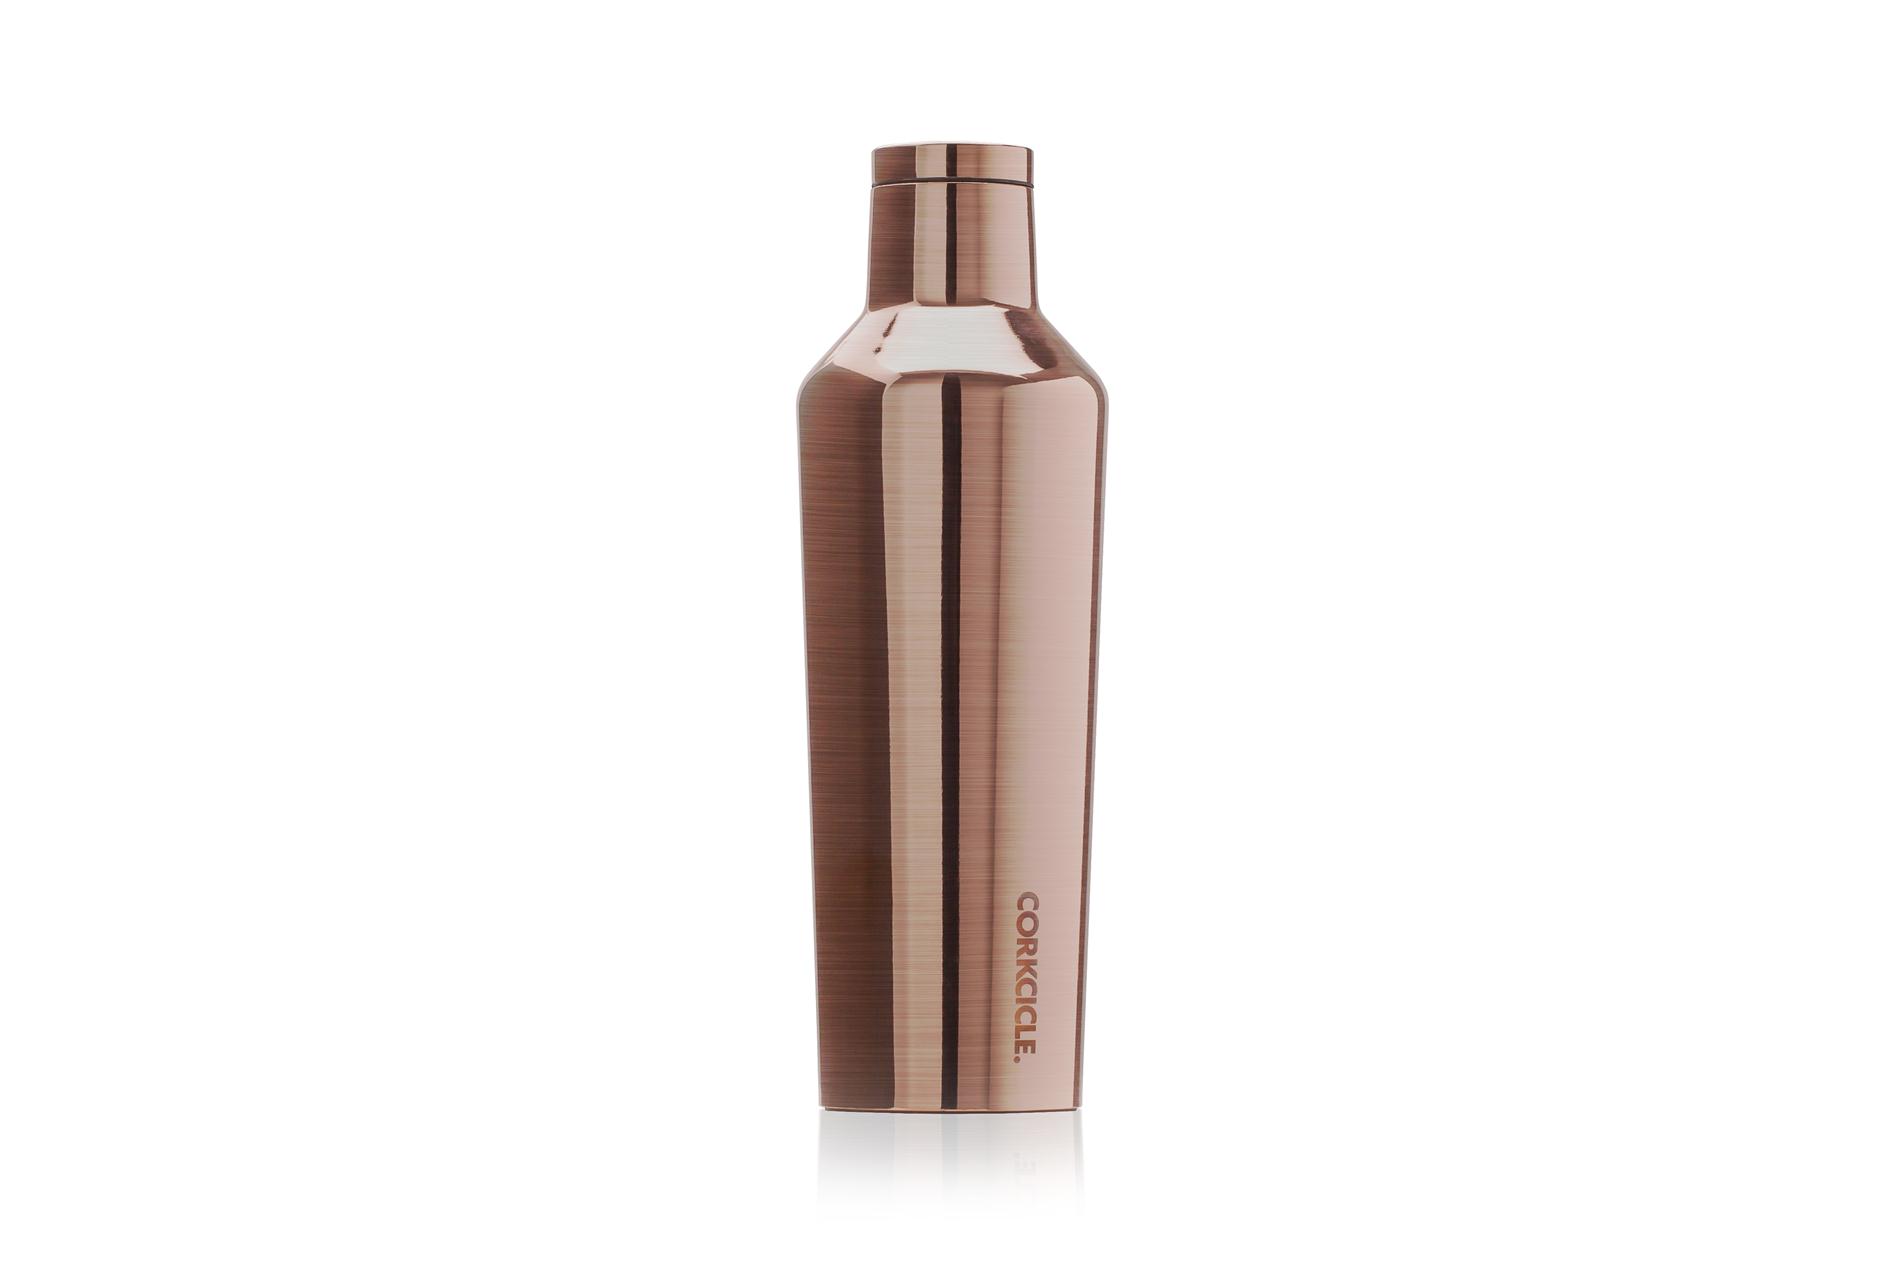 Corkcicle Trinkflasche / Thermo Isolierflasche Copper 475 ml Metallic